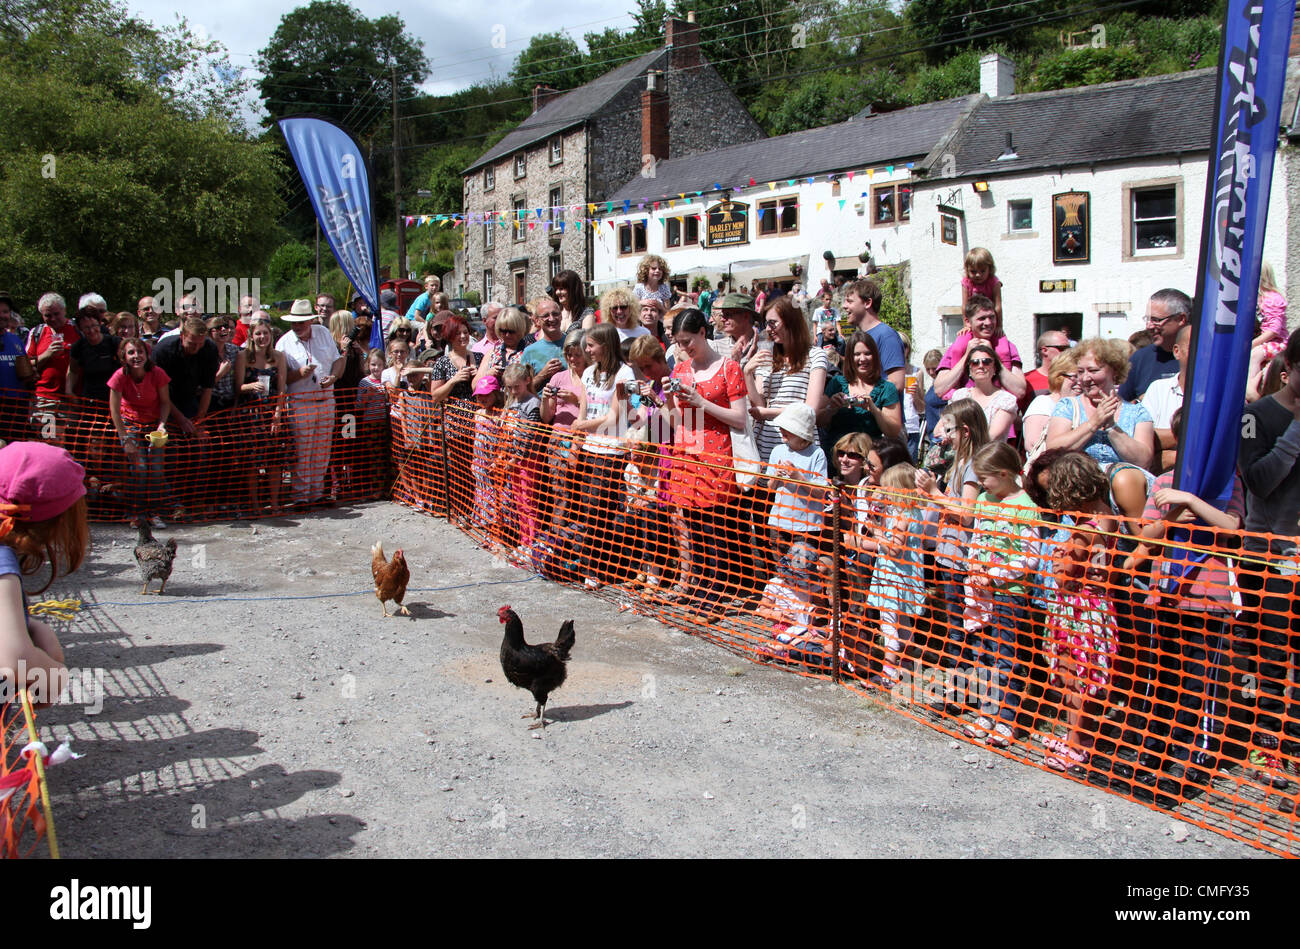 Annual World Hen Racing Championship held on August 4th 2012 at the Barley Mow Inn Public House in the Derbyshire Peak District Village of Bonsall.  Historic event going back over 100 years. Stock Photo